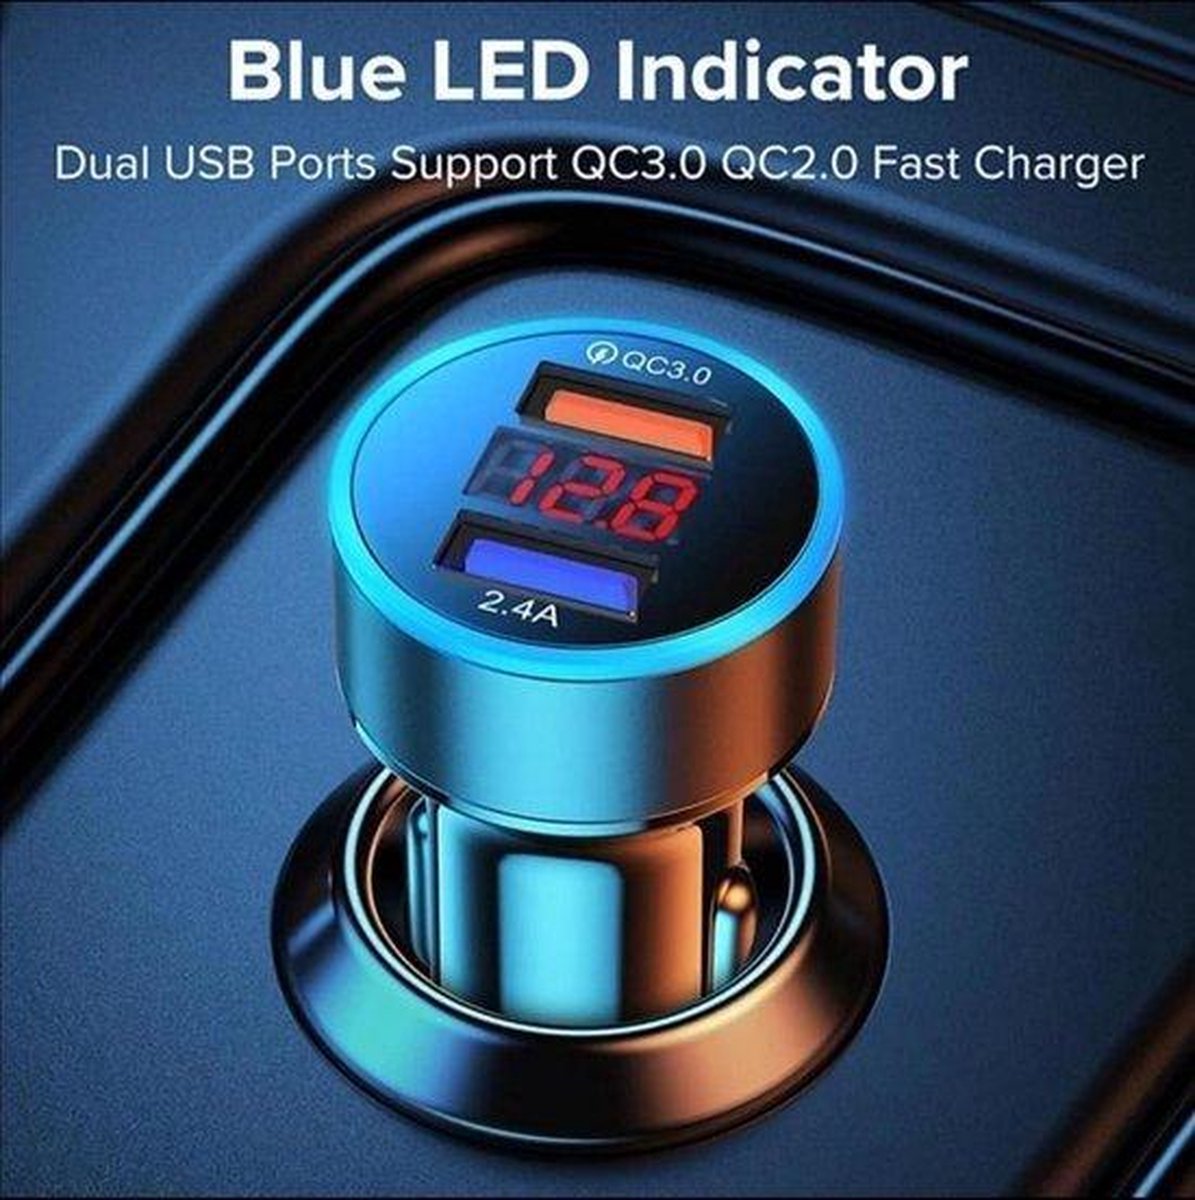 Autolader met LED-licht-Auto USB Dual -auto lader-metaal mini autolader-Power Drive 2 legering 18W 4.8A